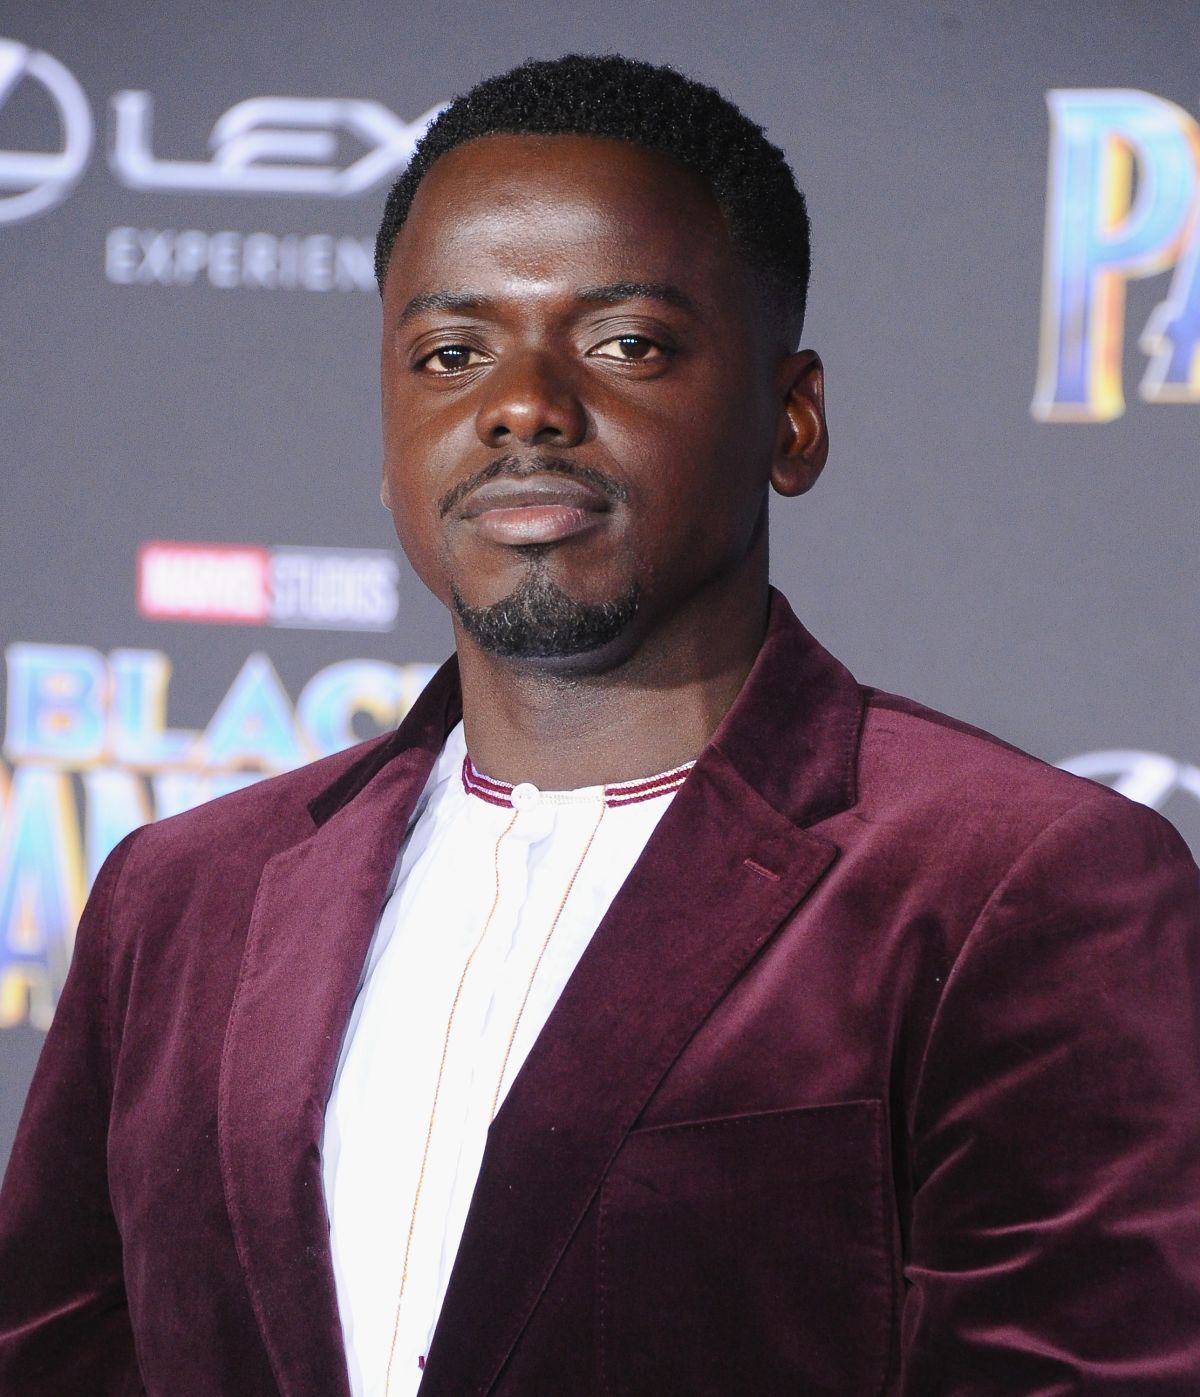 Black Actors Under 40 To Look Out For